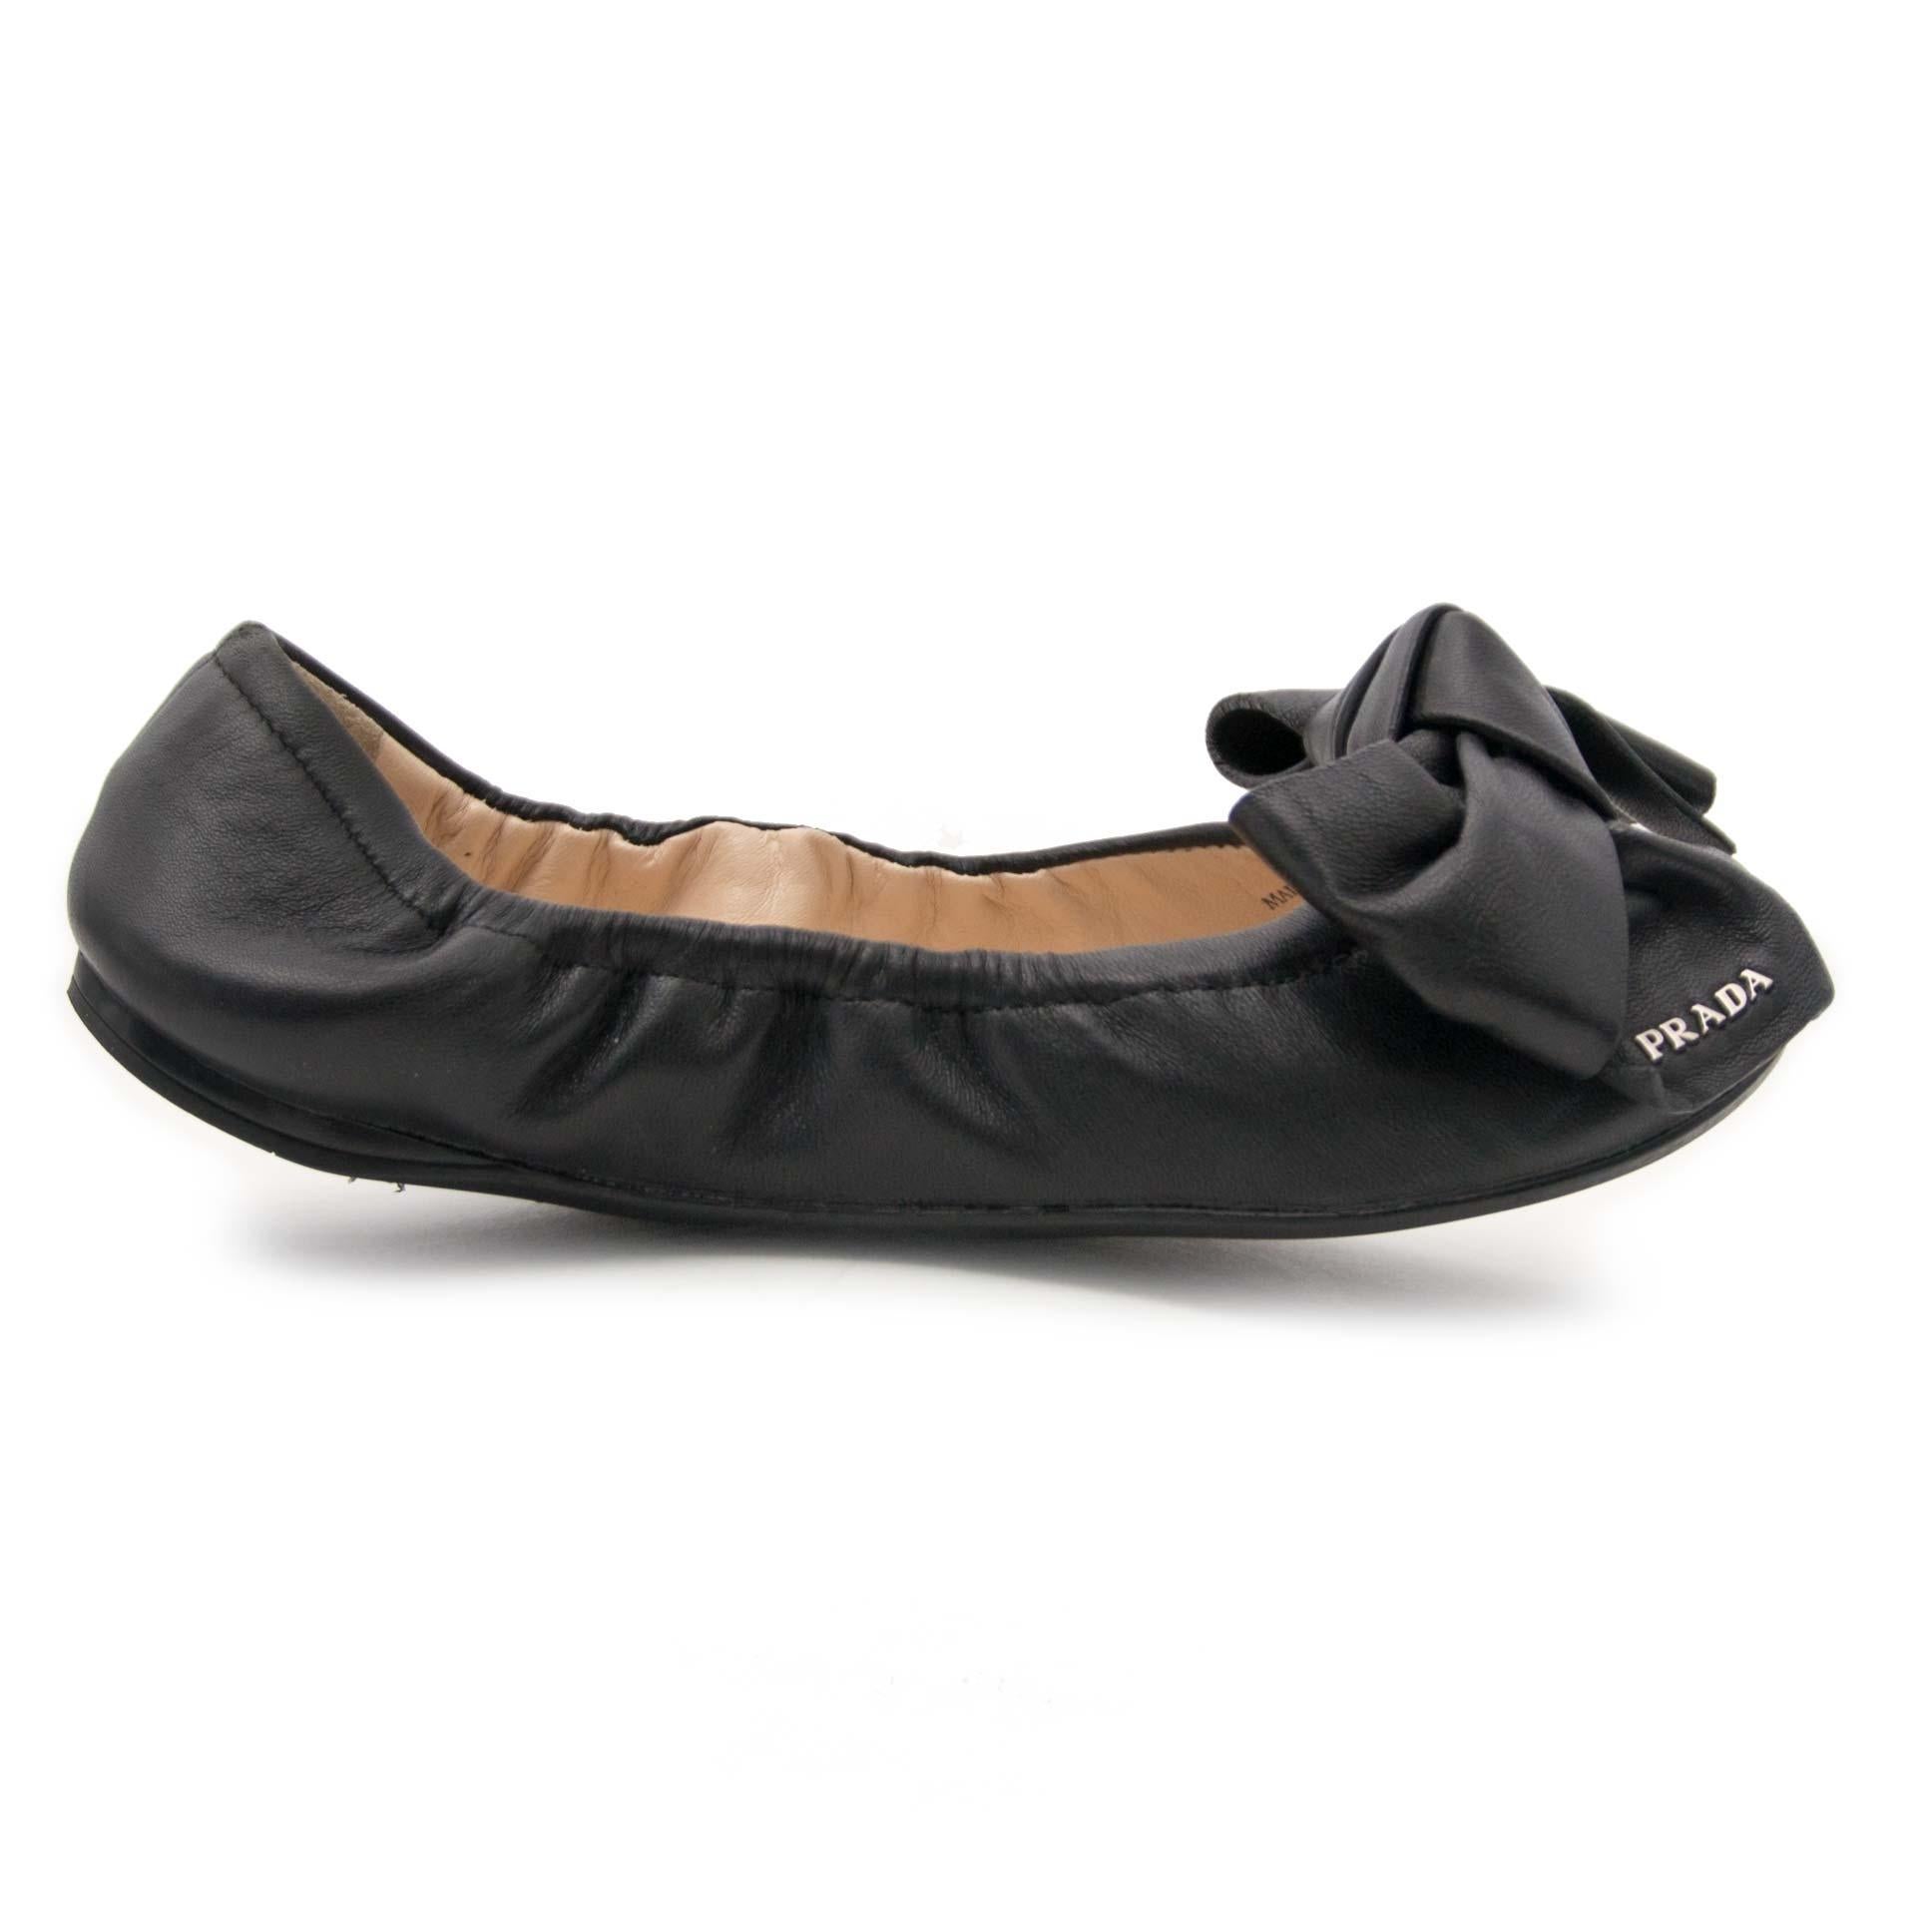 Very good preloved condition!

Prada Black Leather Bow Ballerina Flats - Size 35,5

Choose for classic and comfortable ballerina flats when you have to leave your house quickly.
This pair by Prada is made of leather and the bow on the tip makes the